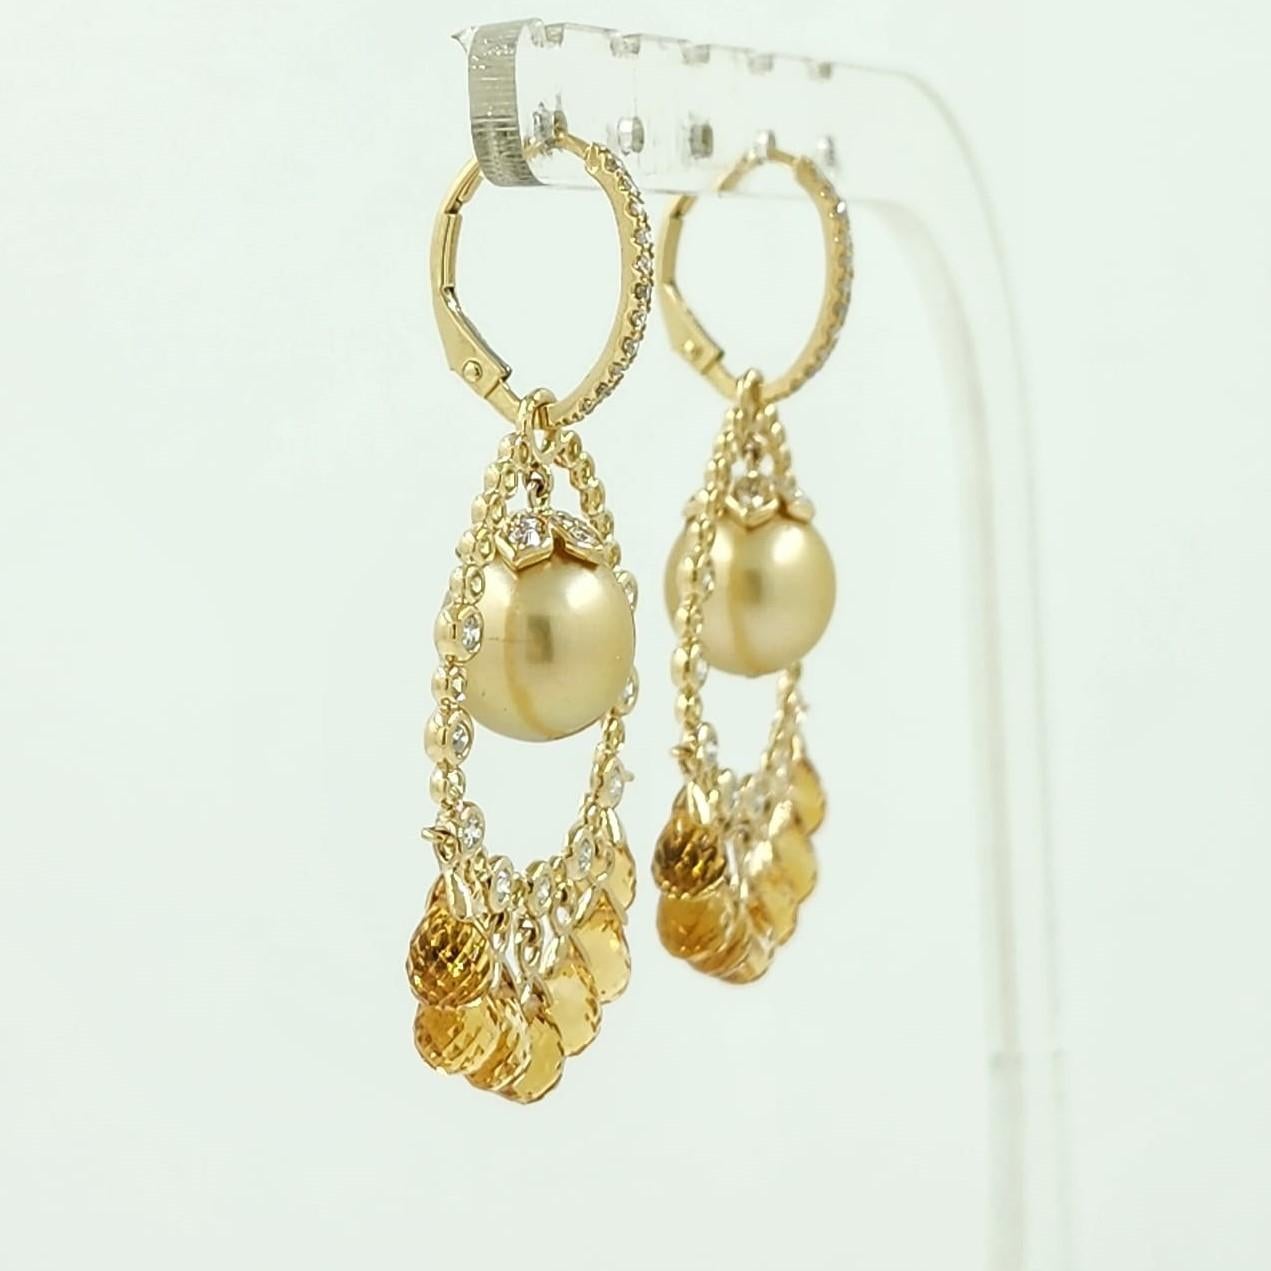 Art Deco Vintage Pearl and Citrine Briolette Diamond Dangle Earrings in 14K Yellow Gold For Sale